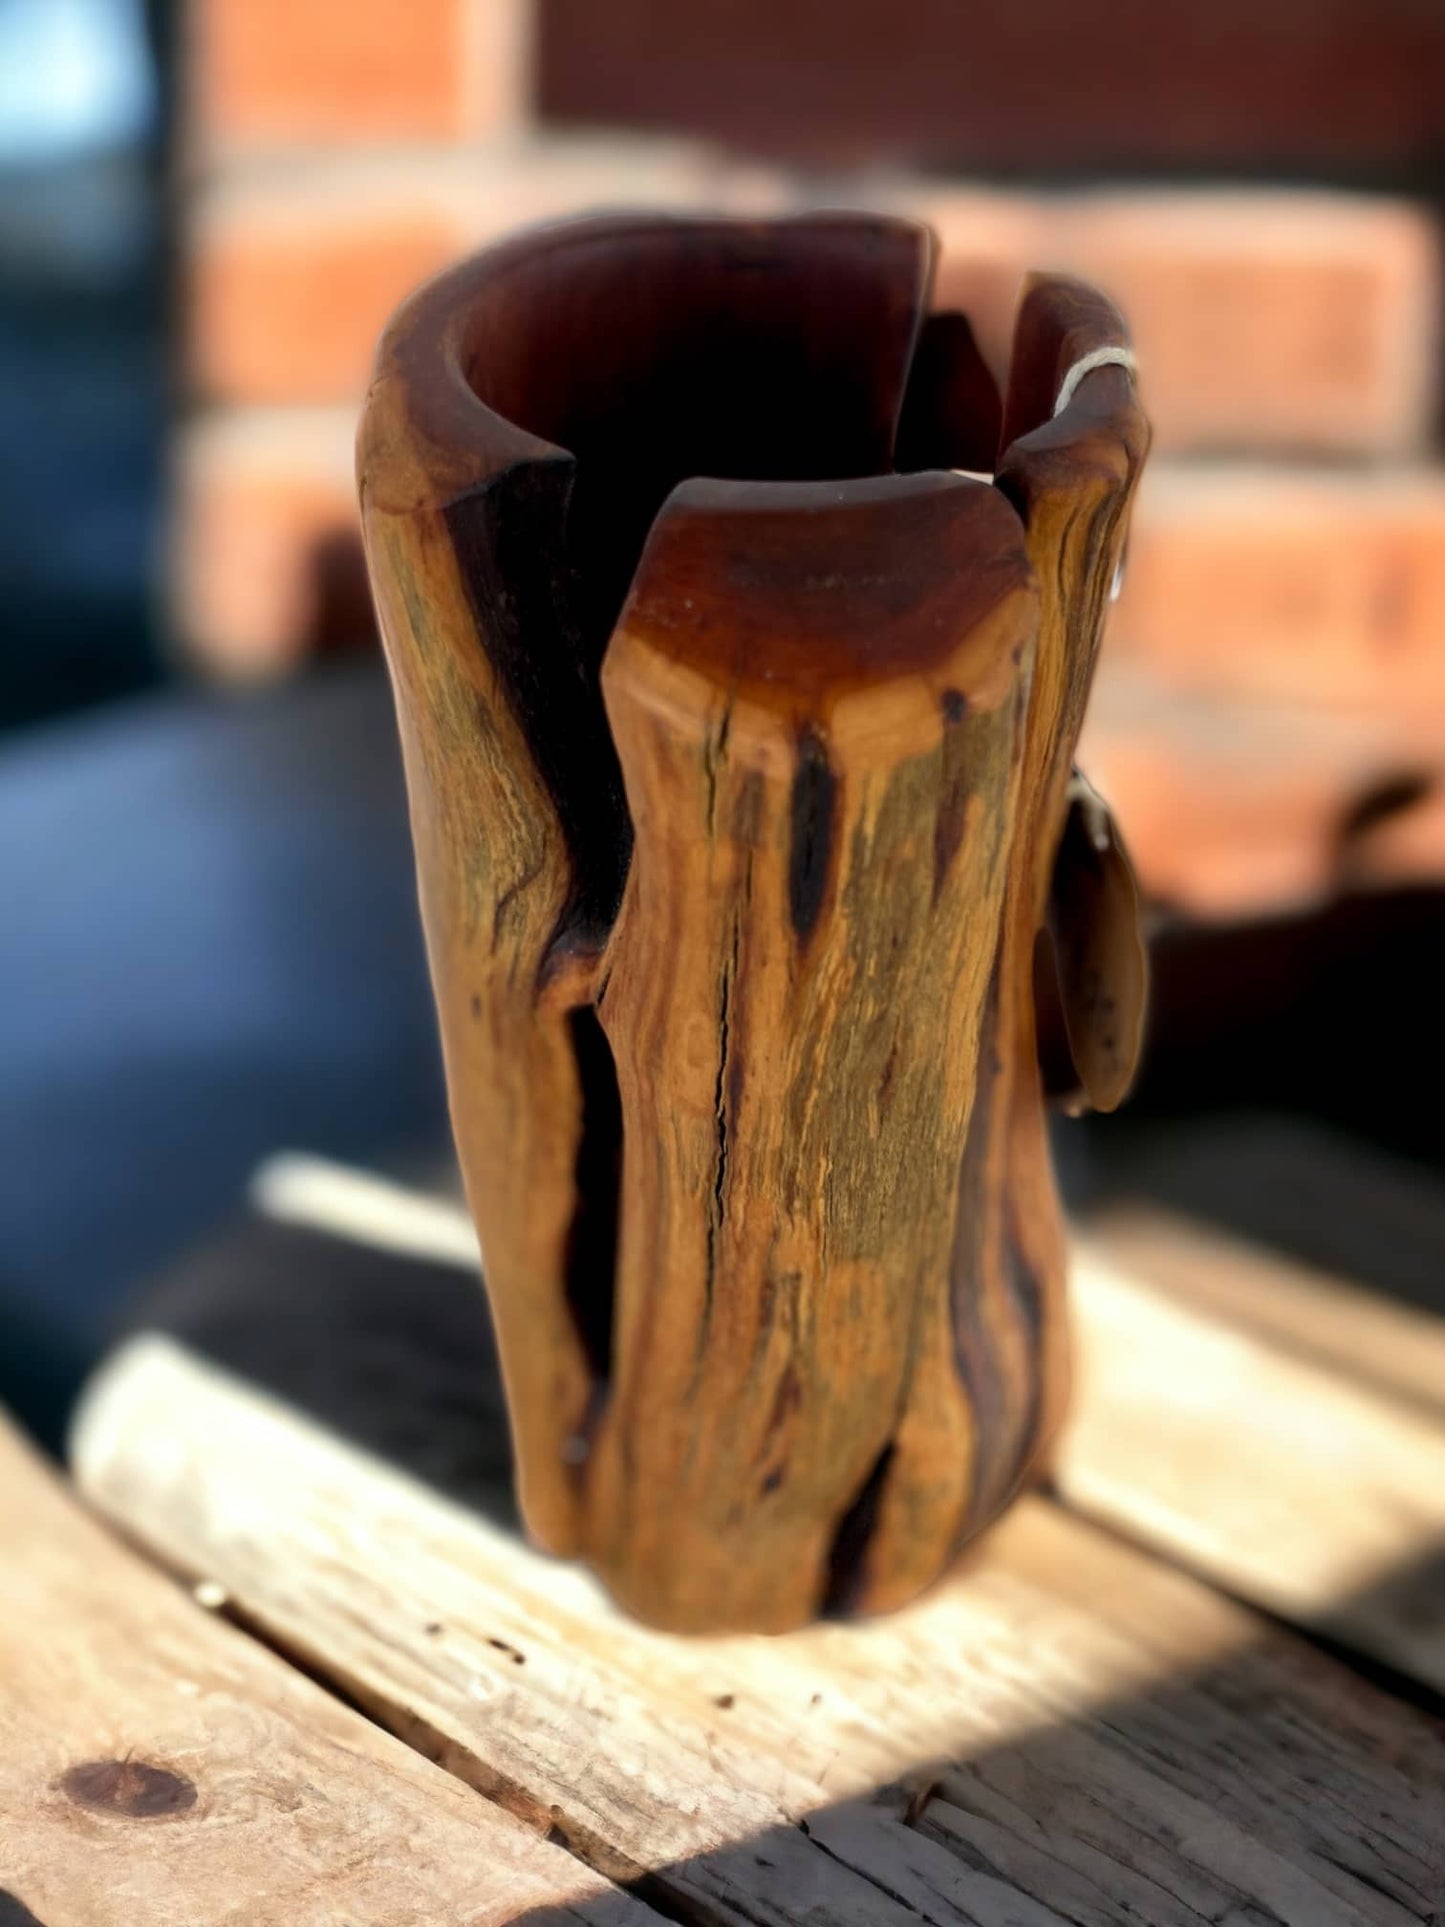 One-of-a-Kind Handcrafted Manzanita Wood Vase: Rustic Decor for Your Home! 10"x5" Size with Beautiful Natural Cracks!